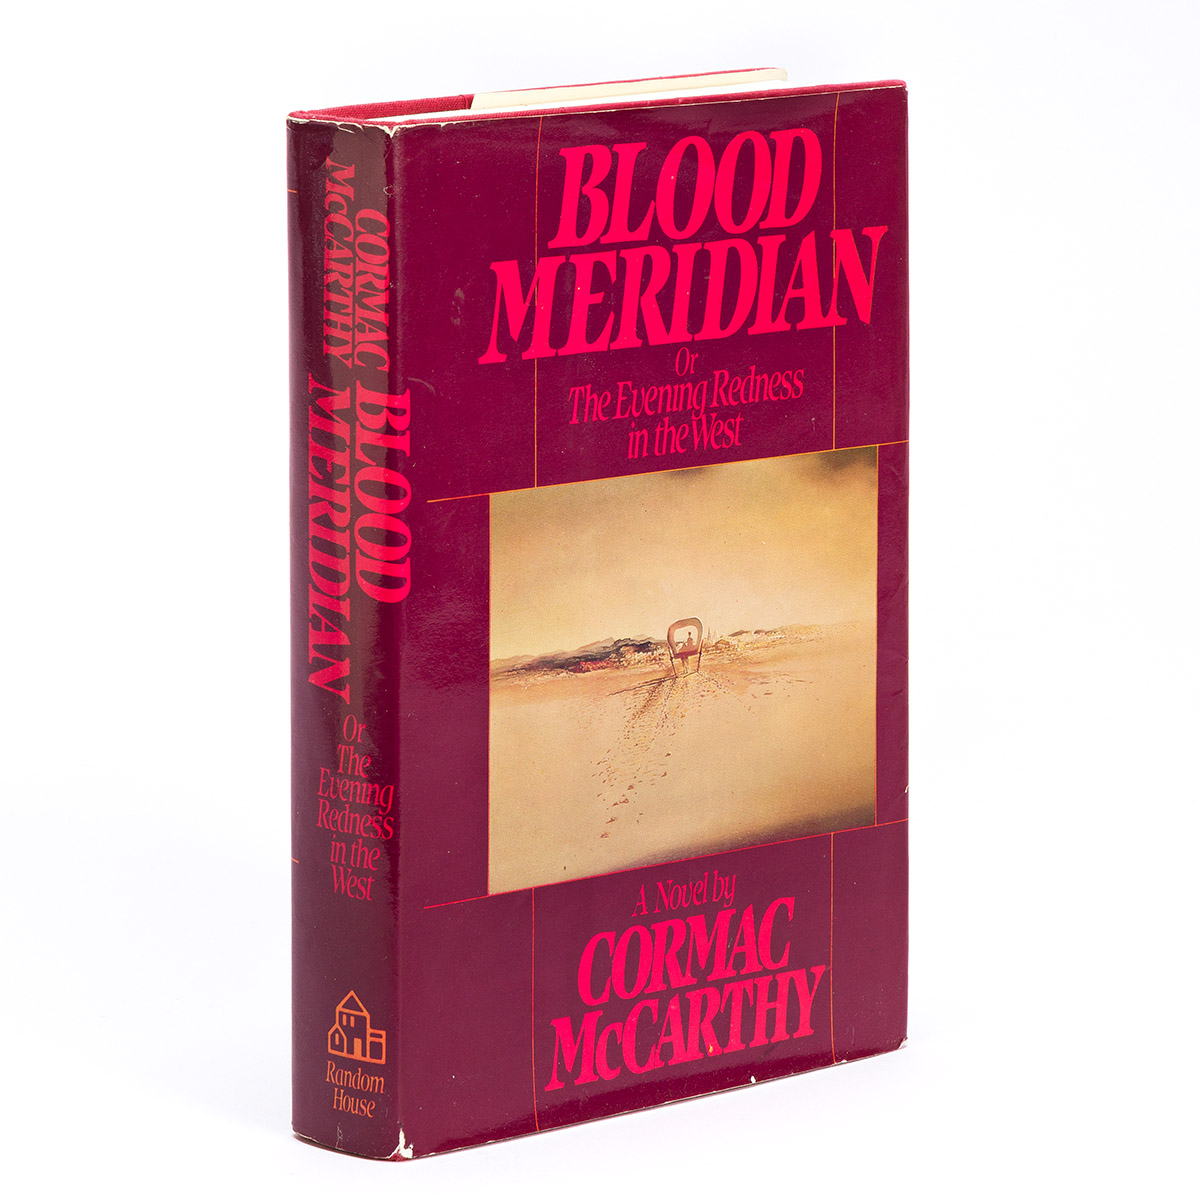 MCCARTHY, CORMAC. Blood Meridian or the Evening Redness in the West.